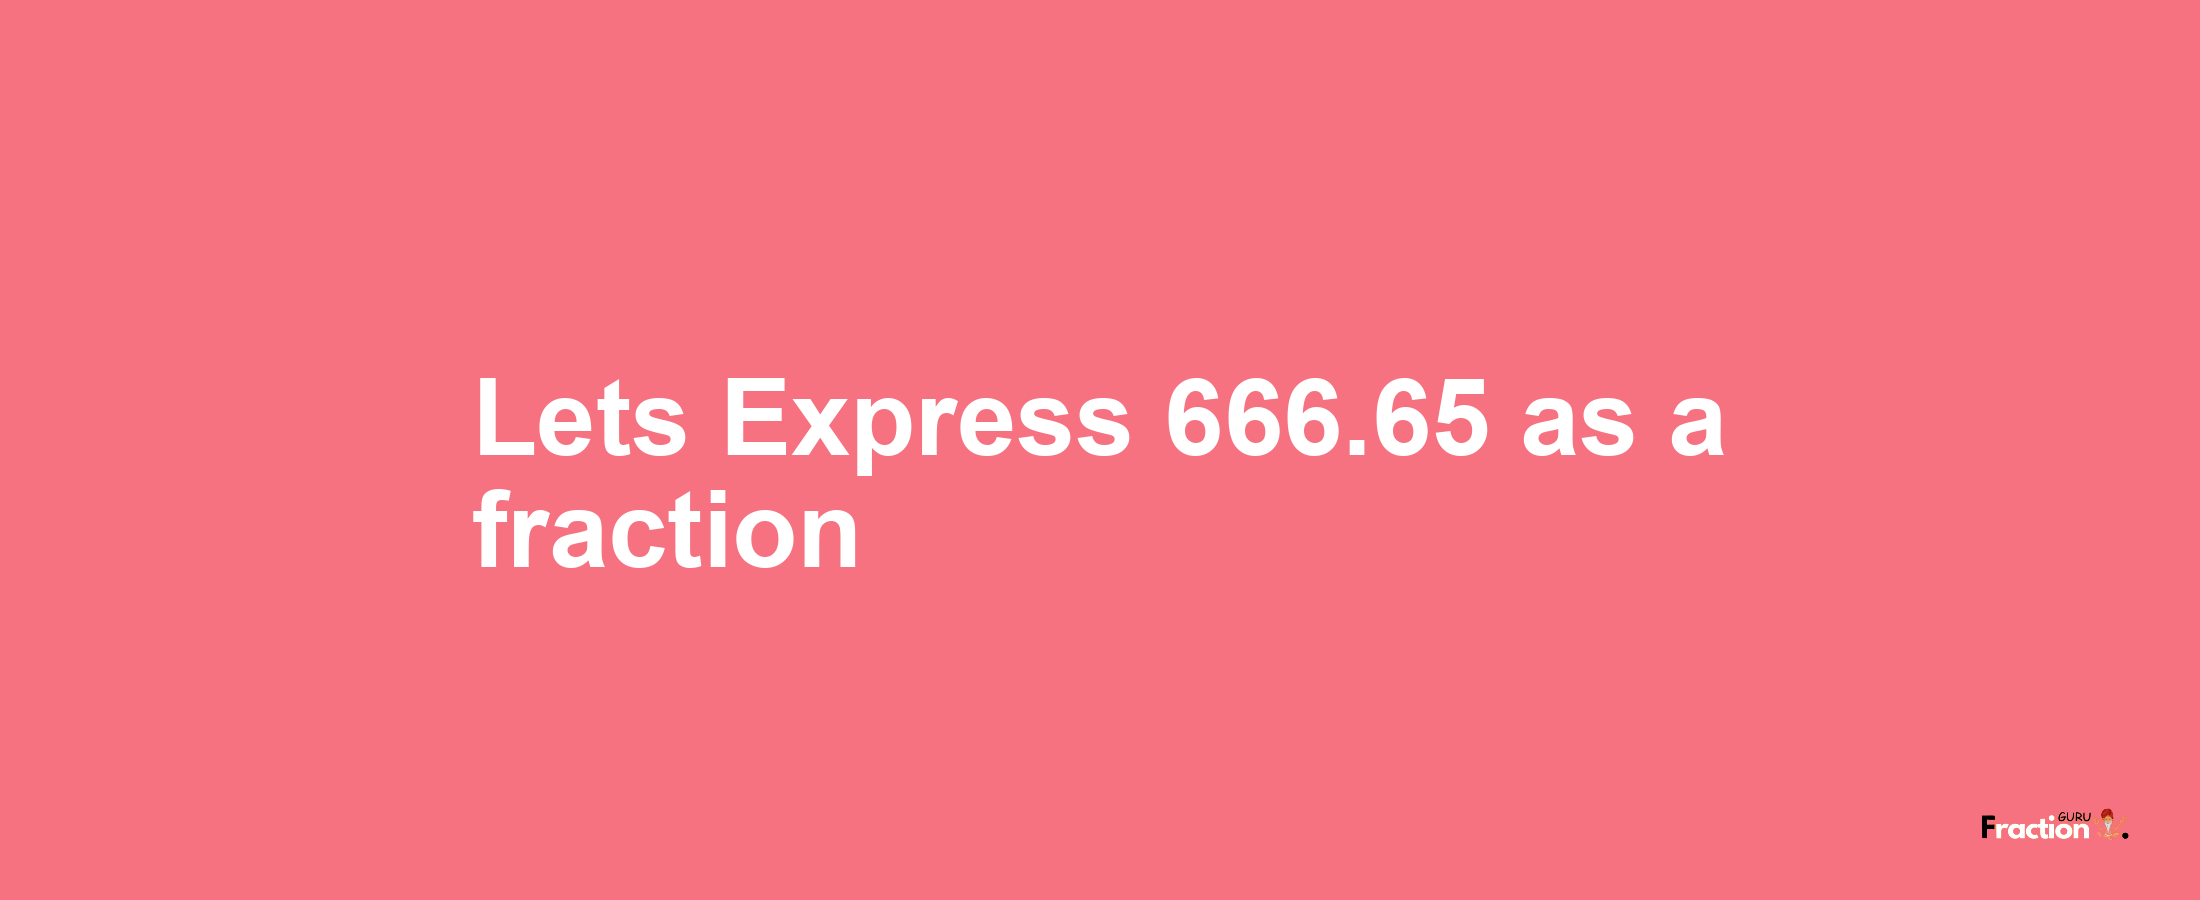 Lets Express 666.65 as afraction